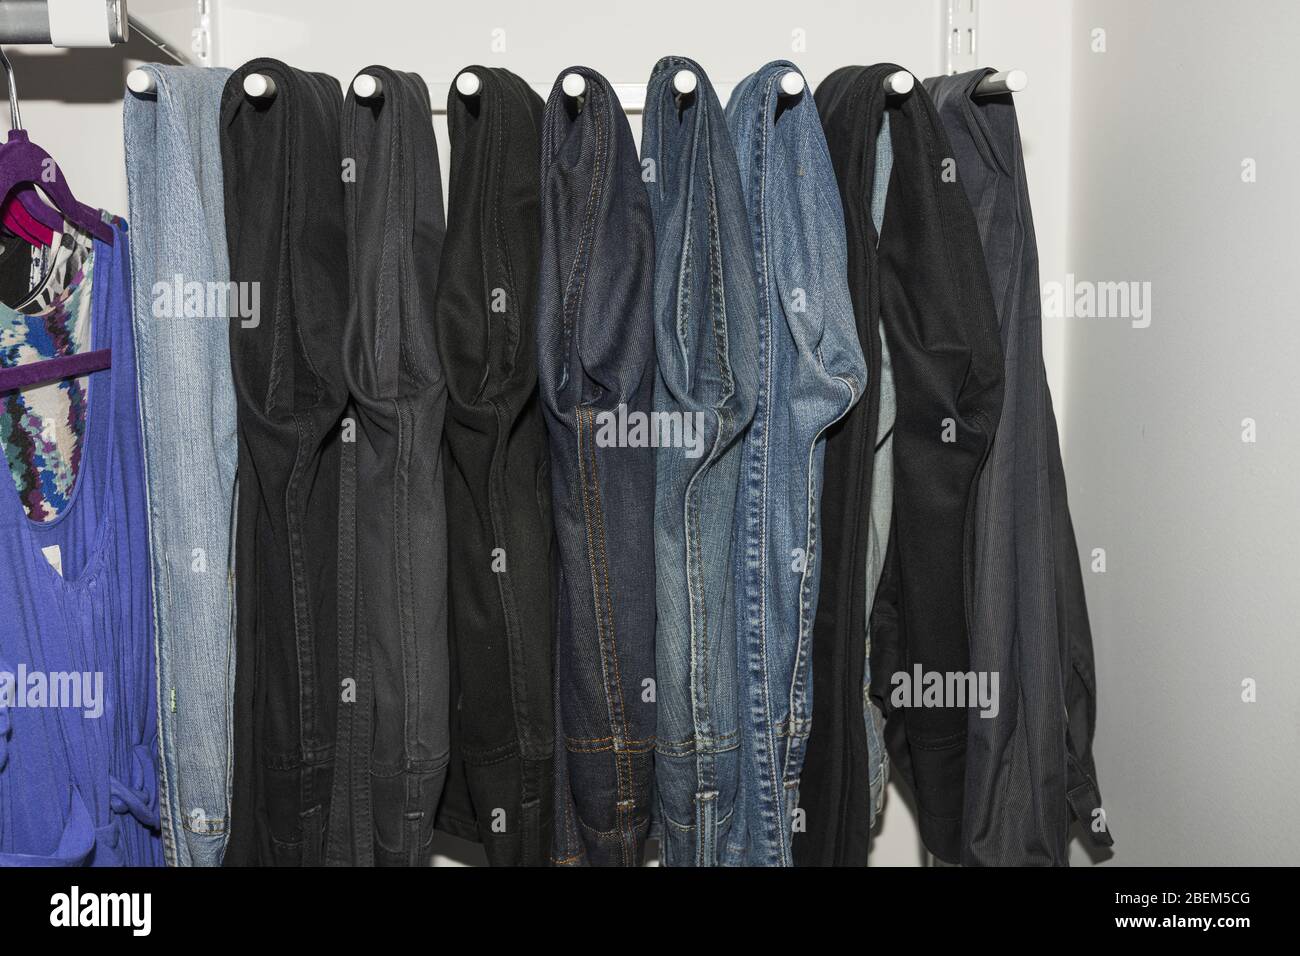 Close up view of interior of built-in wardrobe. Blue and black jeans on white hangers. Cloth organizer. Stock Photo